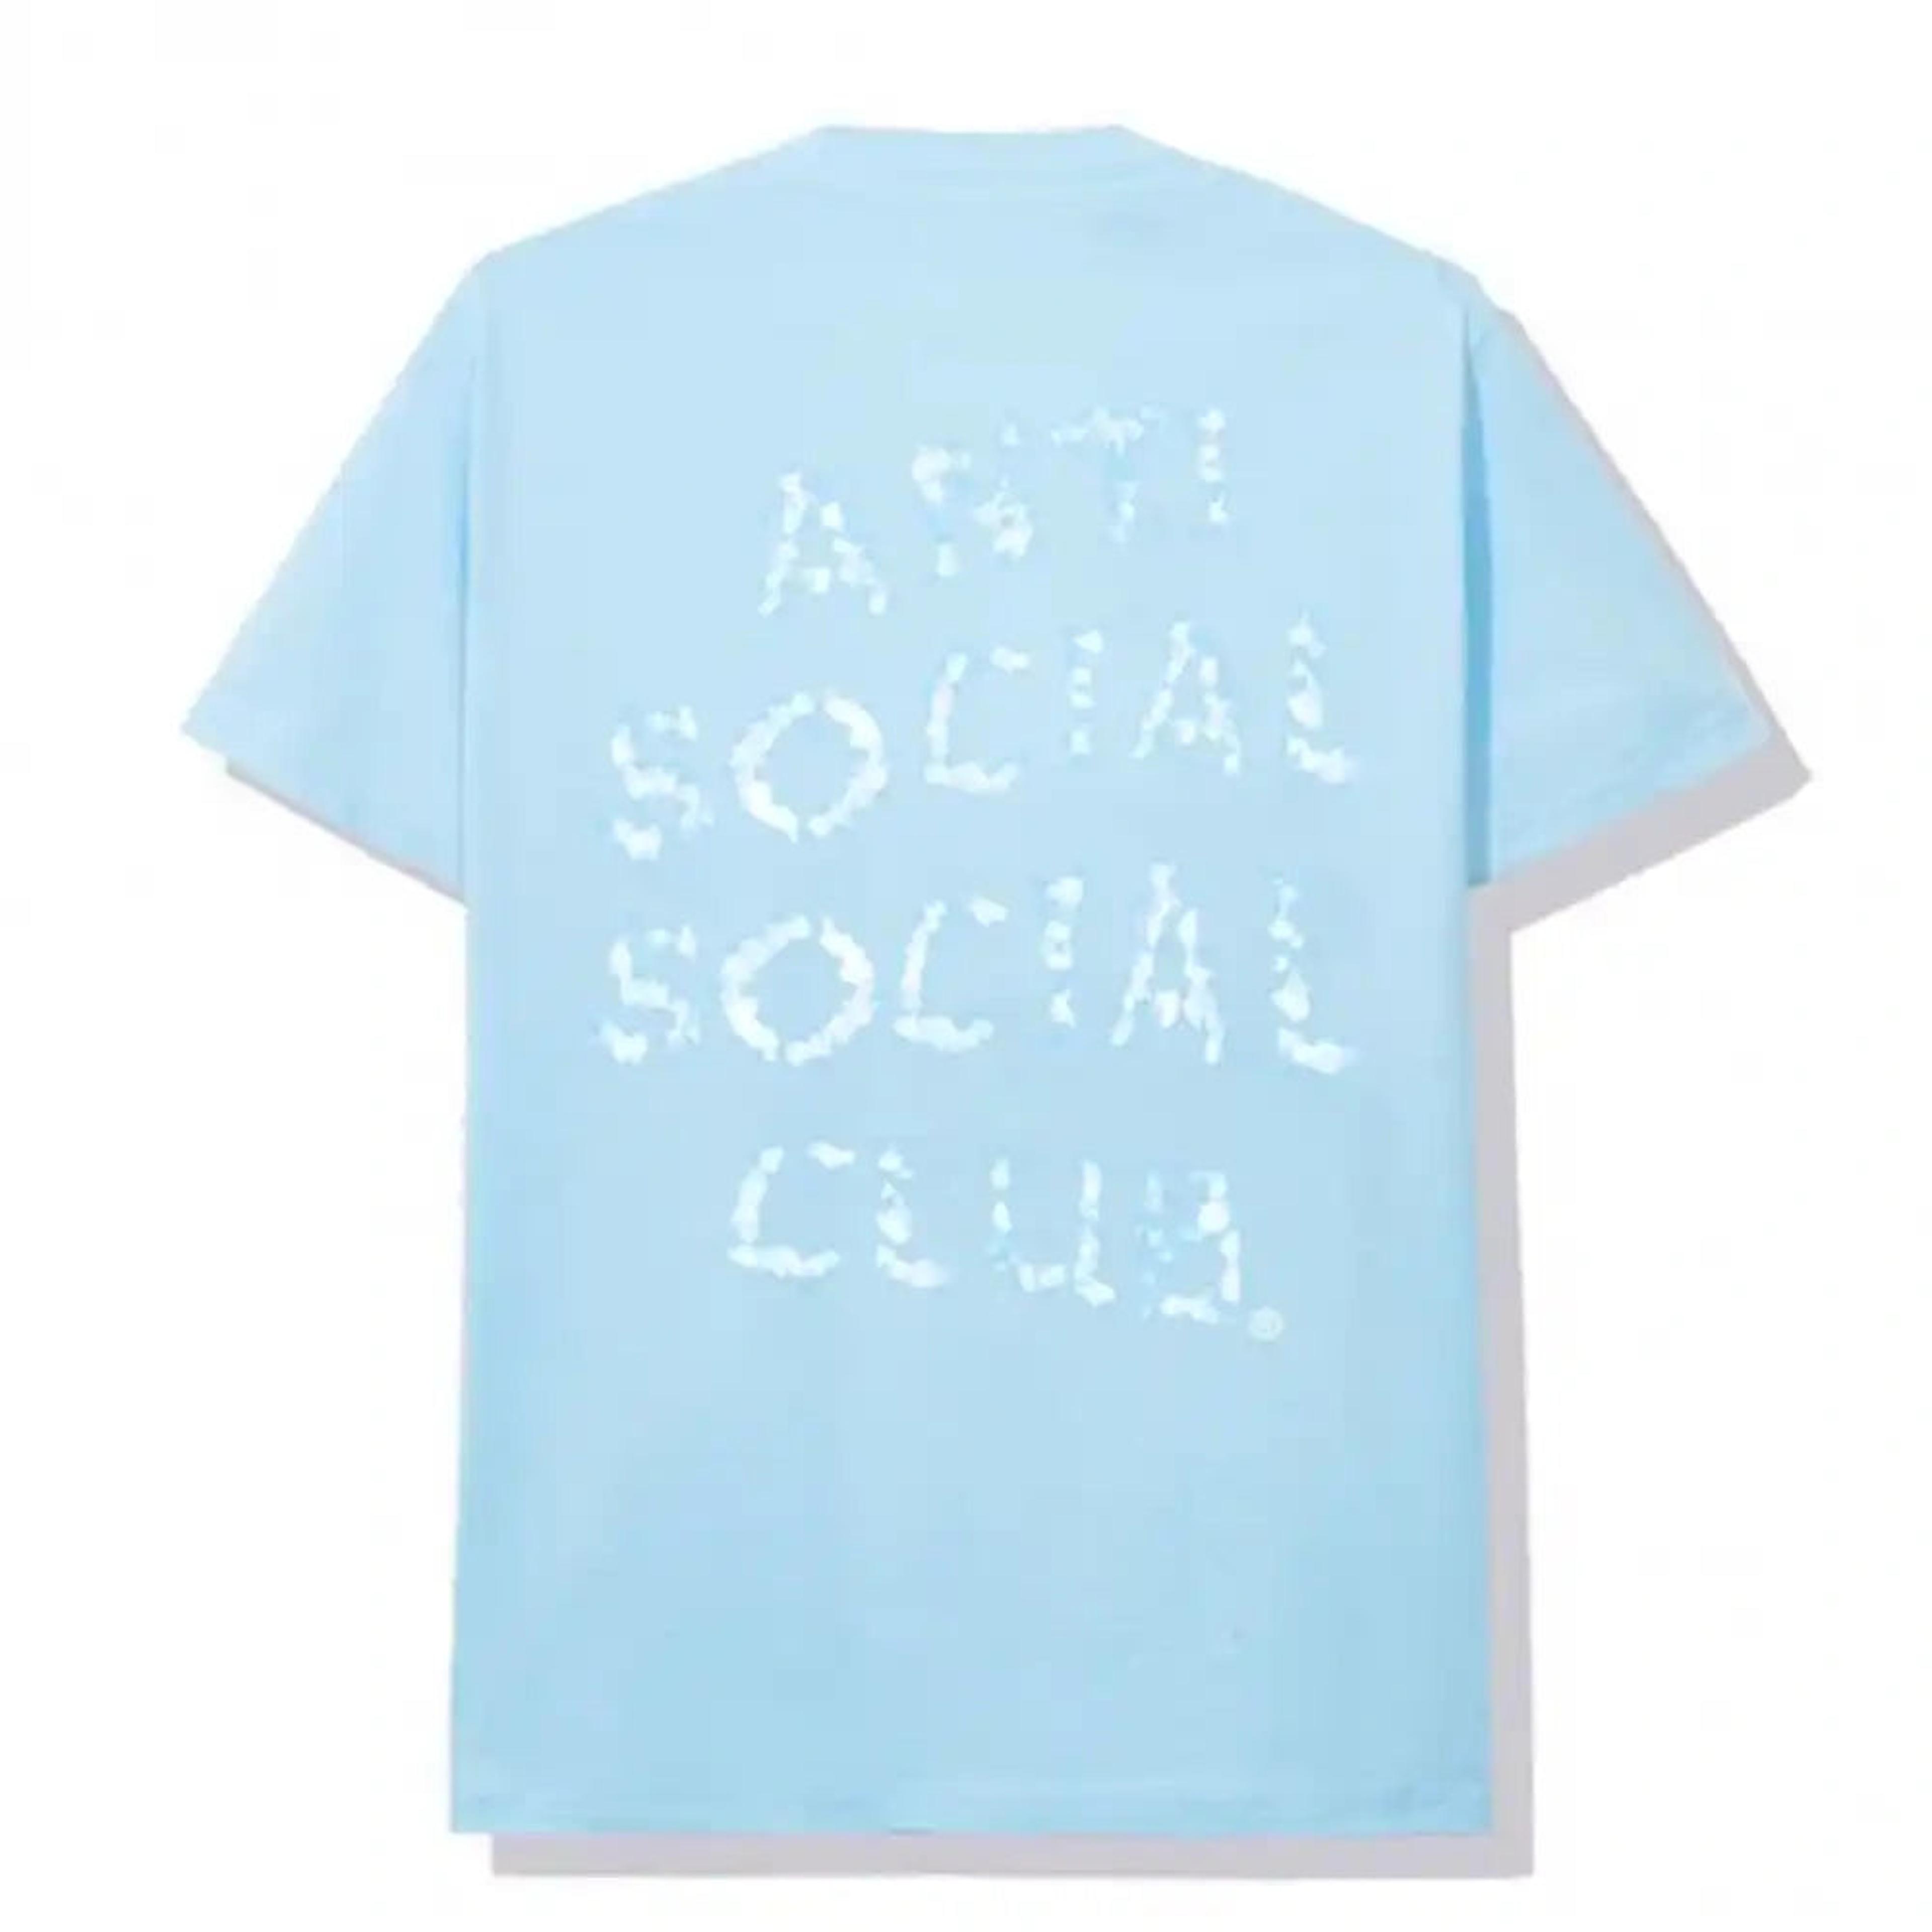 Anti Social Social Club Partly Cloudy Blue Tee ASSC DS Brand New